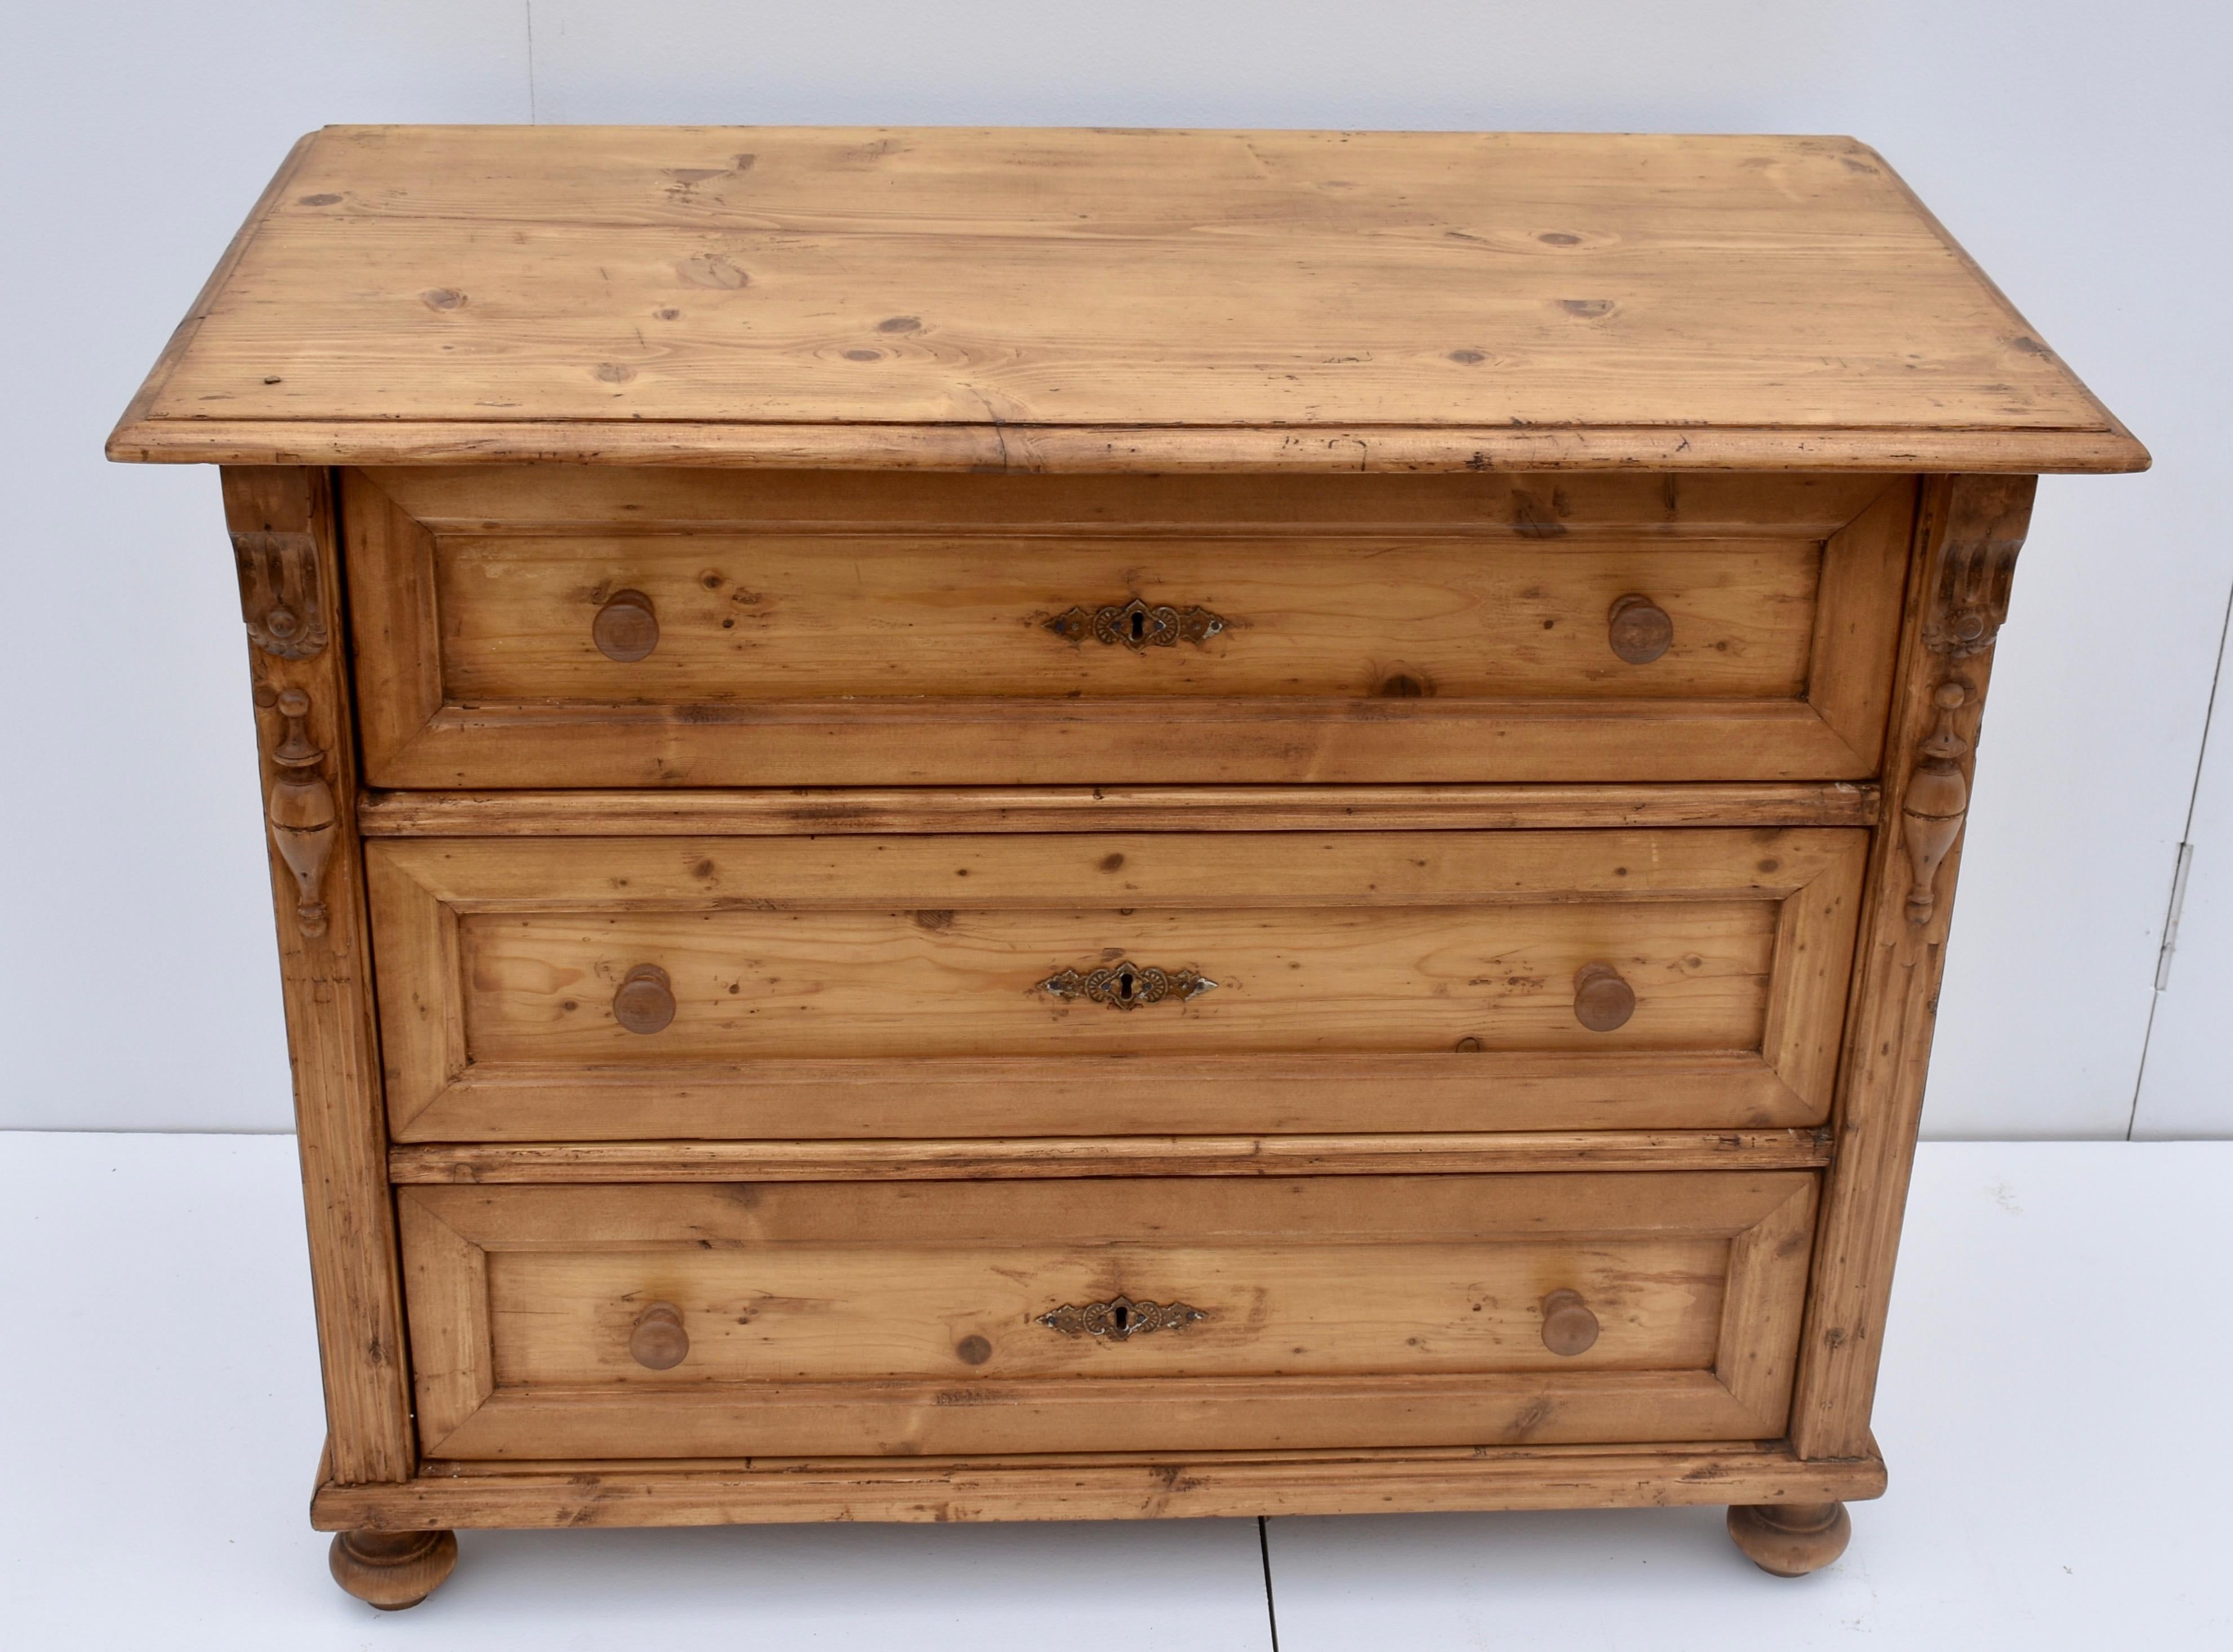 This attractive little German three drawer chest has a step-down routed edge to the top. The three deep hand-cut dovetailed drawers are trimmed with wide molding at the front, giving them the appearance of flat panels. The front corners are